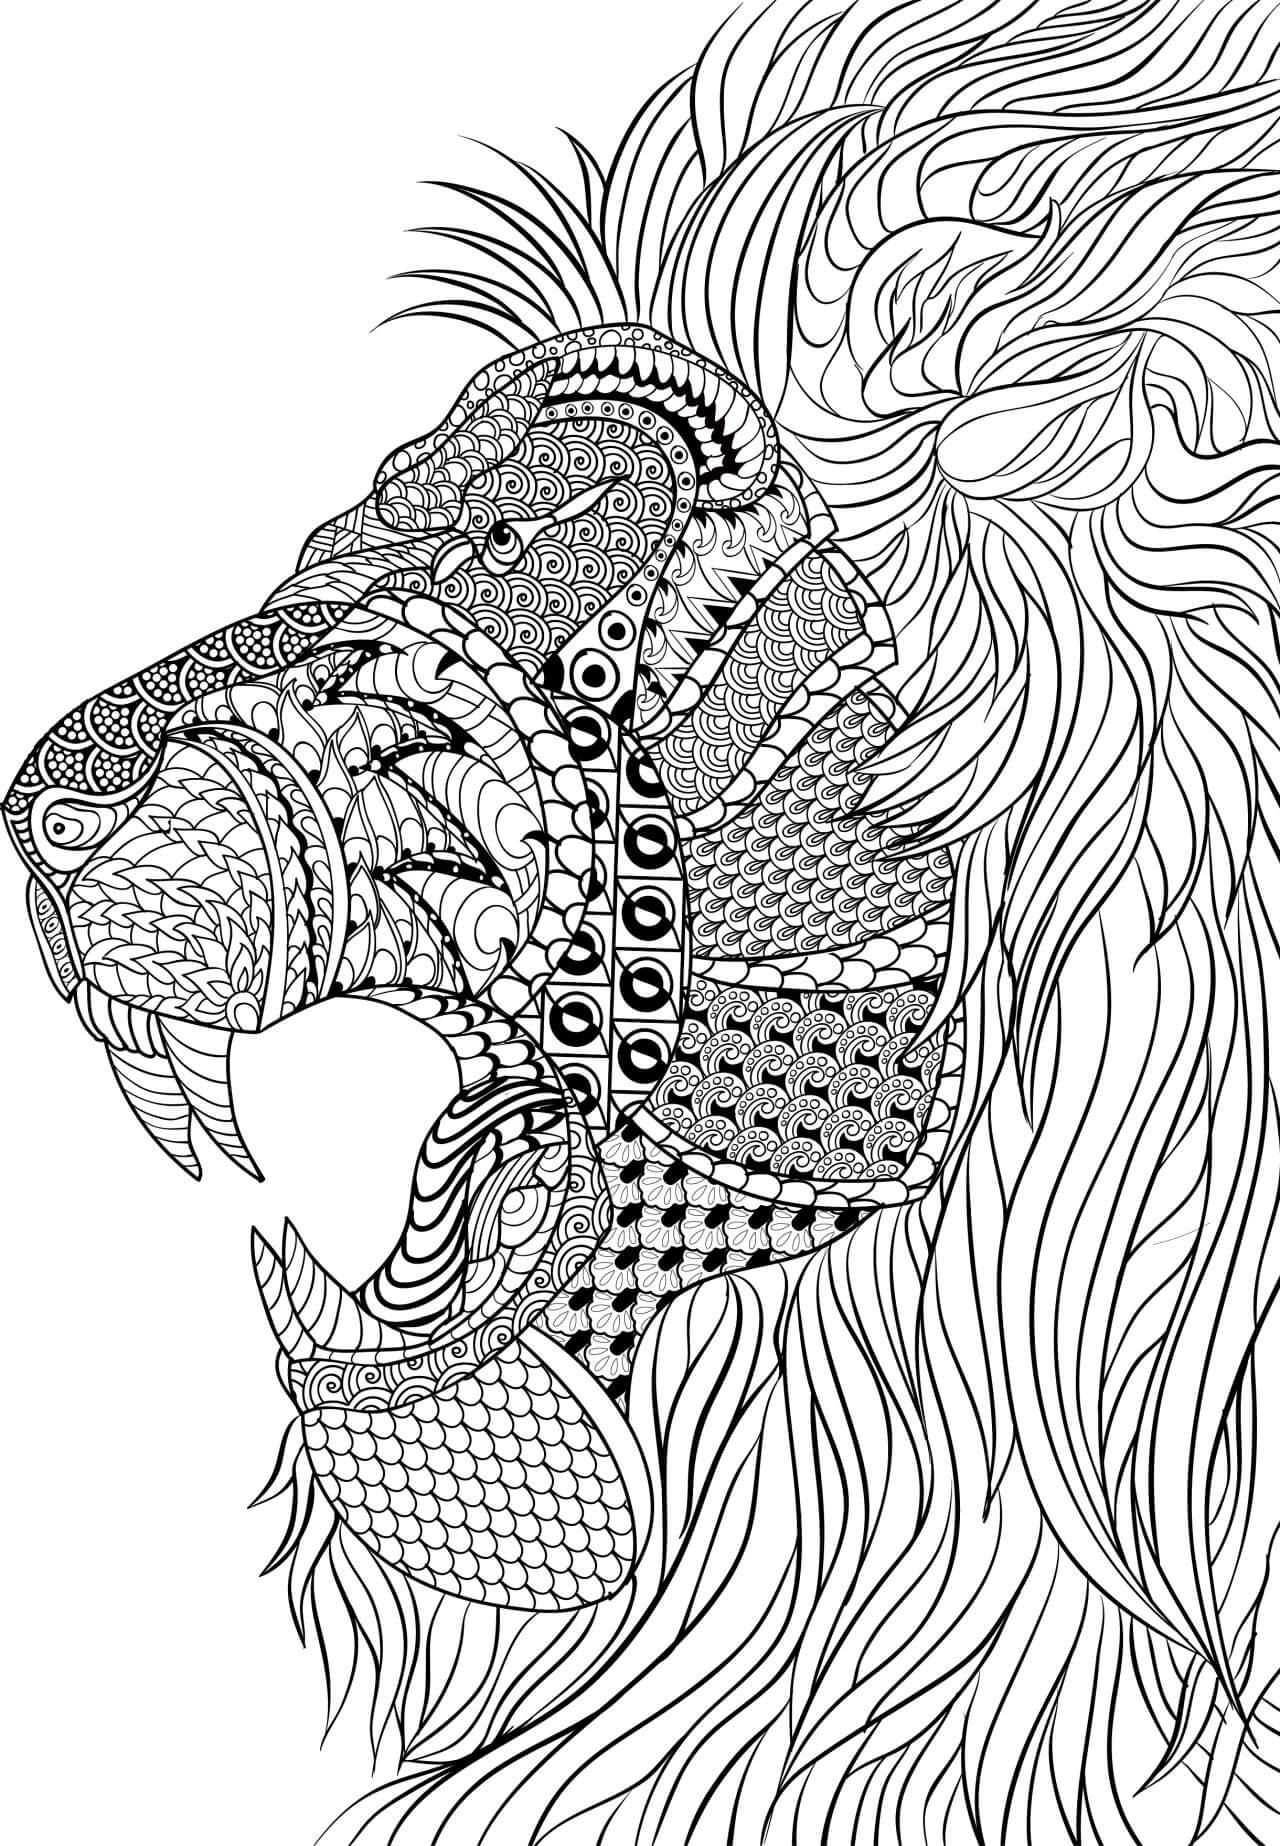 Coloring Pages For Adults Difficult Animals
 Coloring Pages For Adults Difficult Animals 4